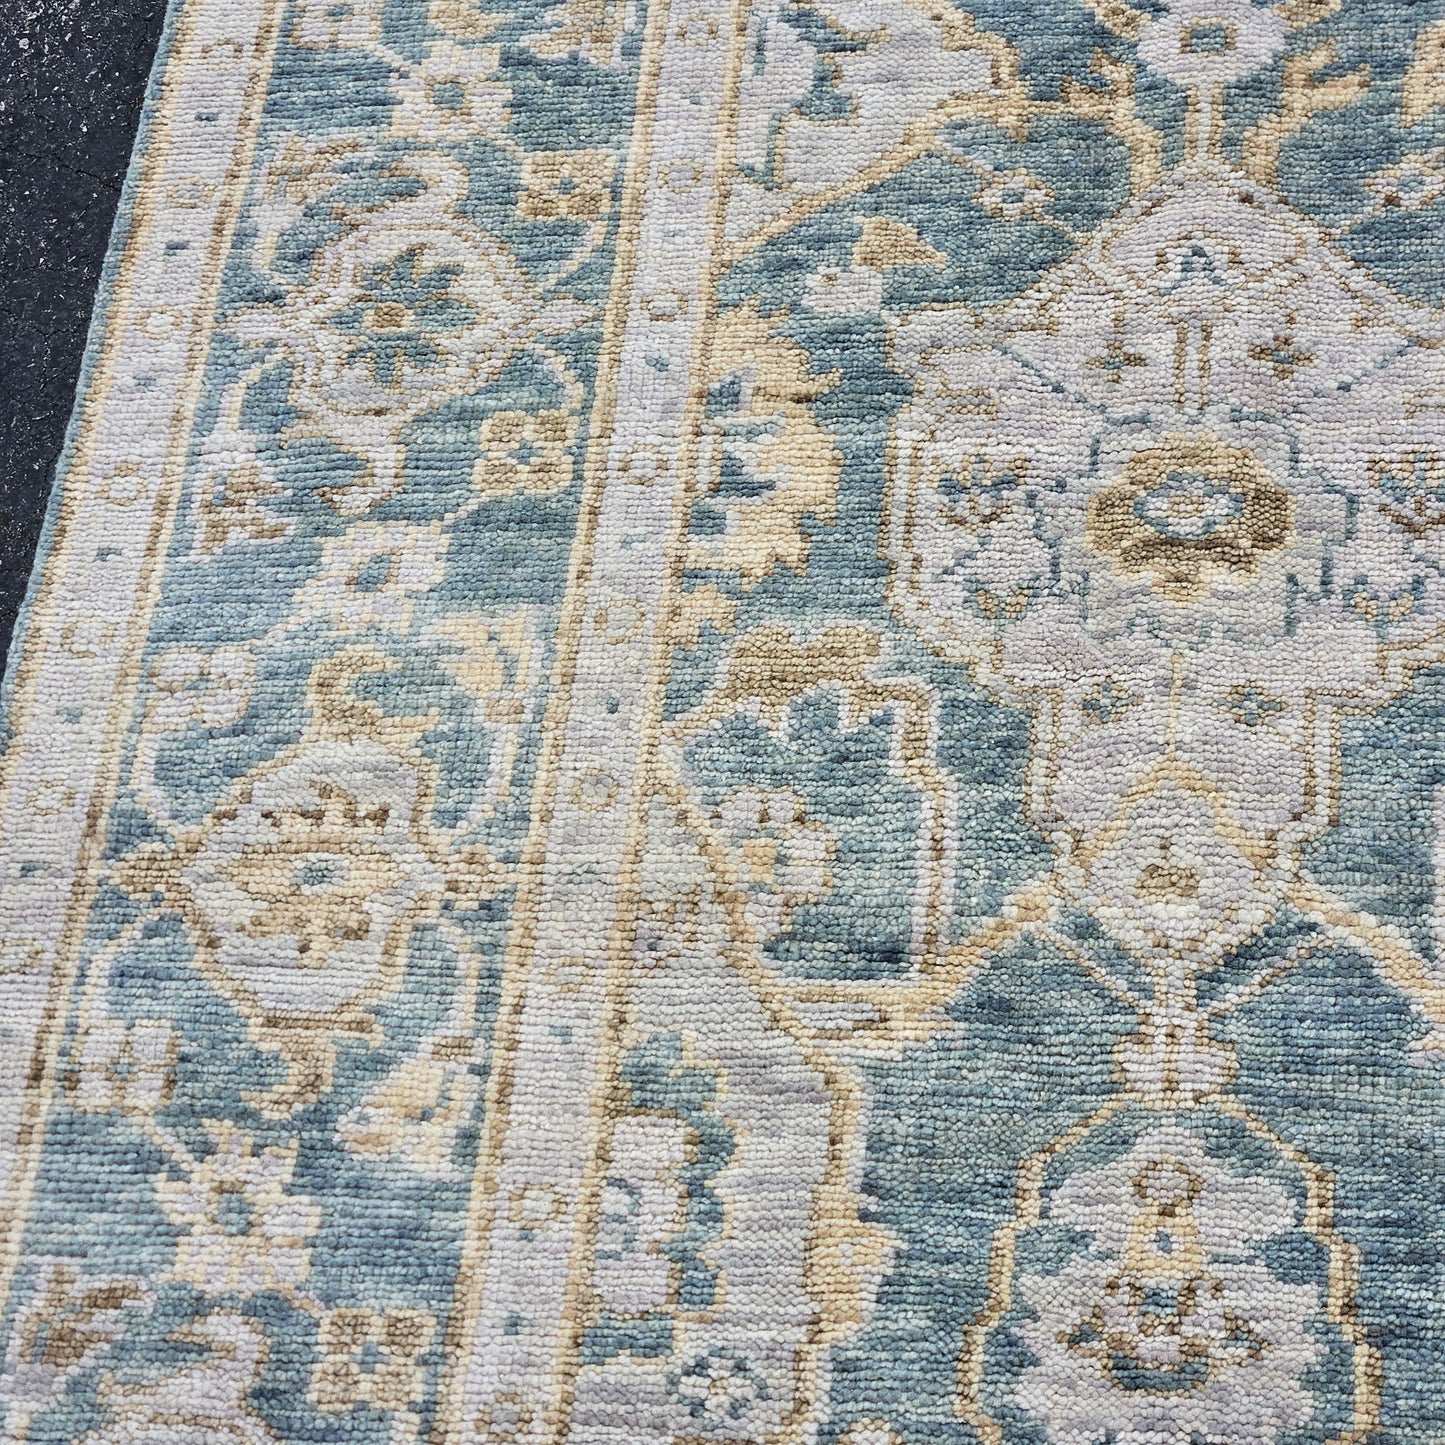 100% Wool Hand Knotted Beautiful Multi Colored Room Size Rug / Carpet - 7' 11" x 10'